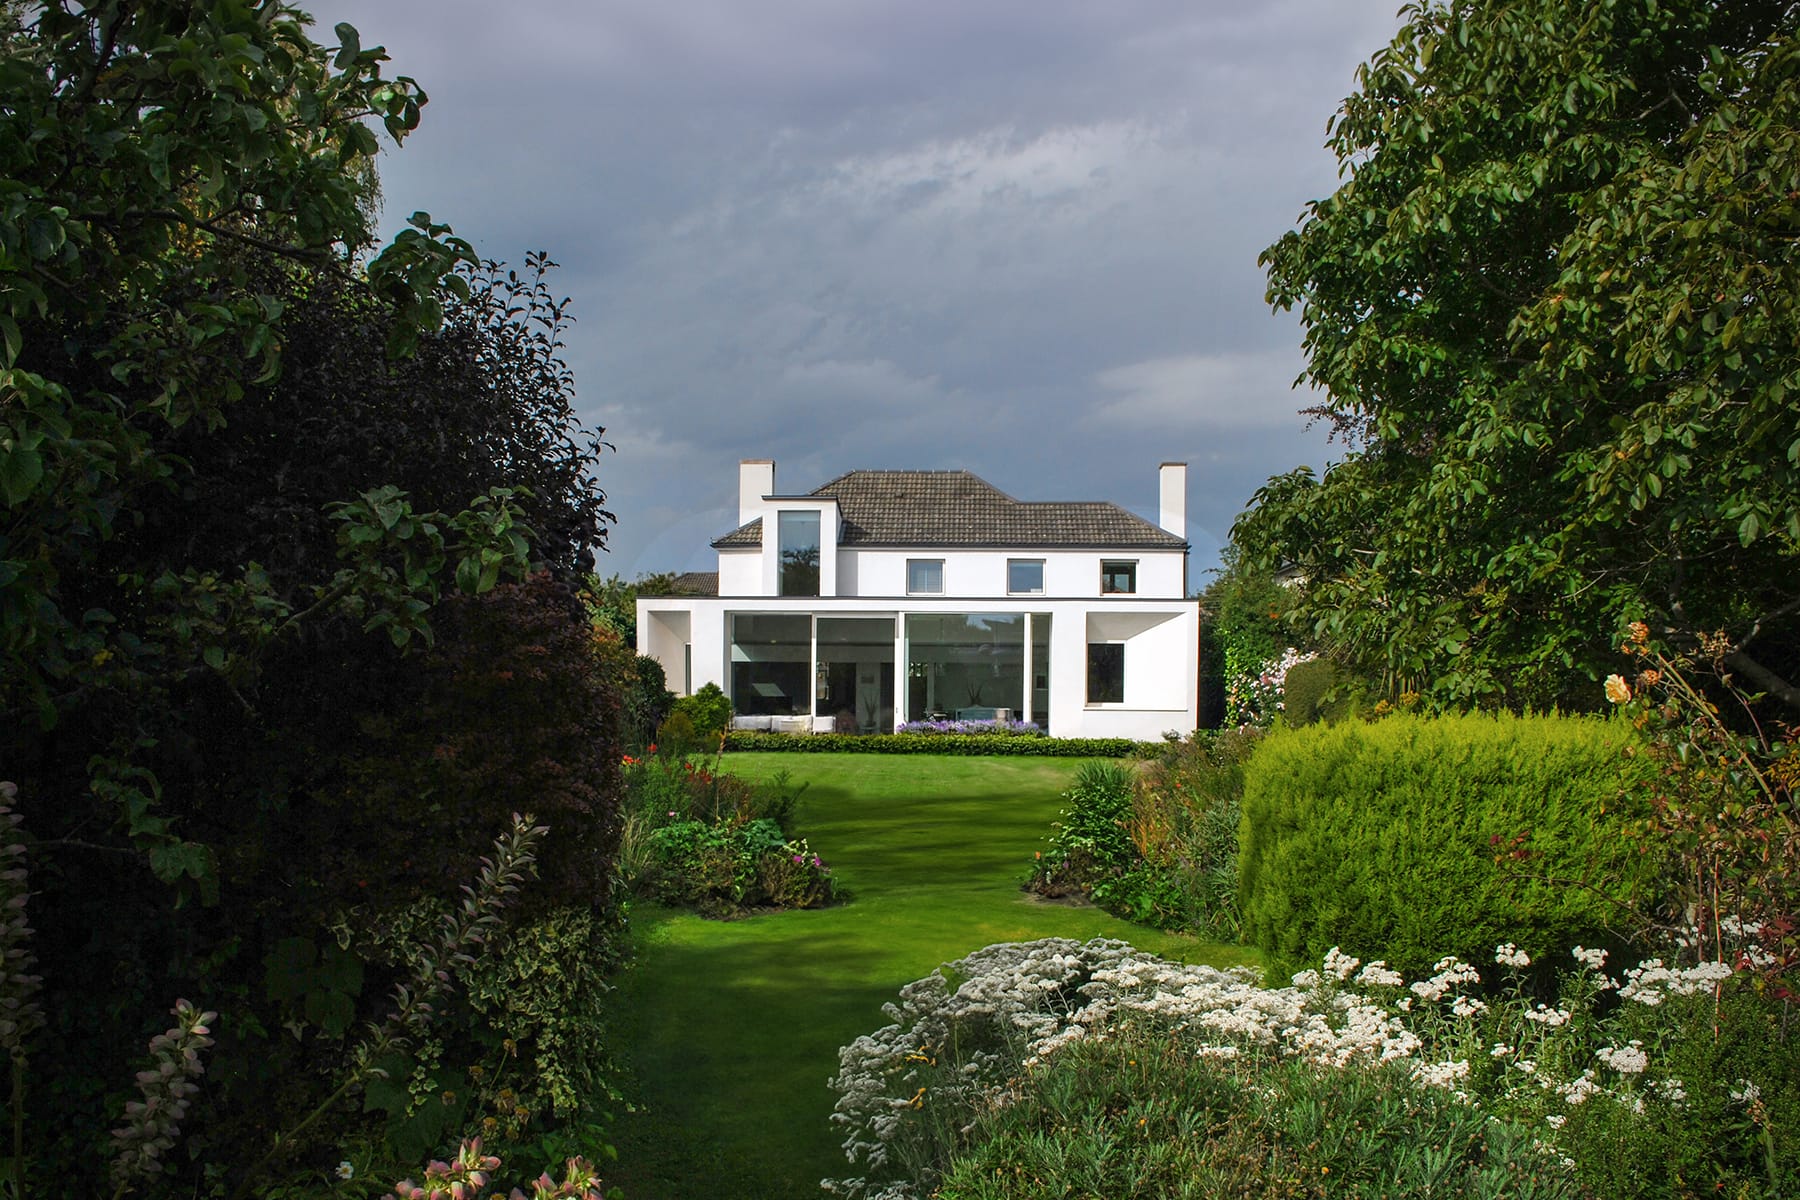 A spacious white house is designed by Dublin Architects, surrounded by lush greenery and trees in a beautifully landscaped garden